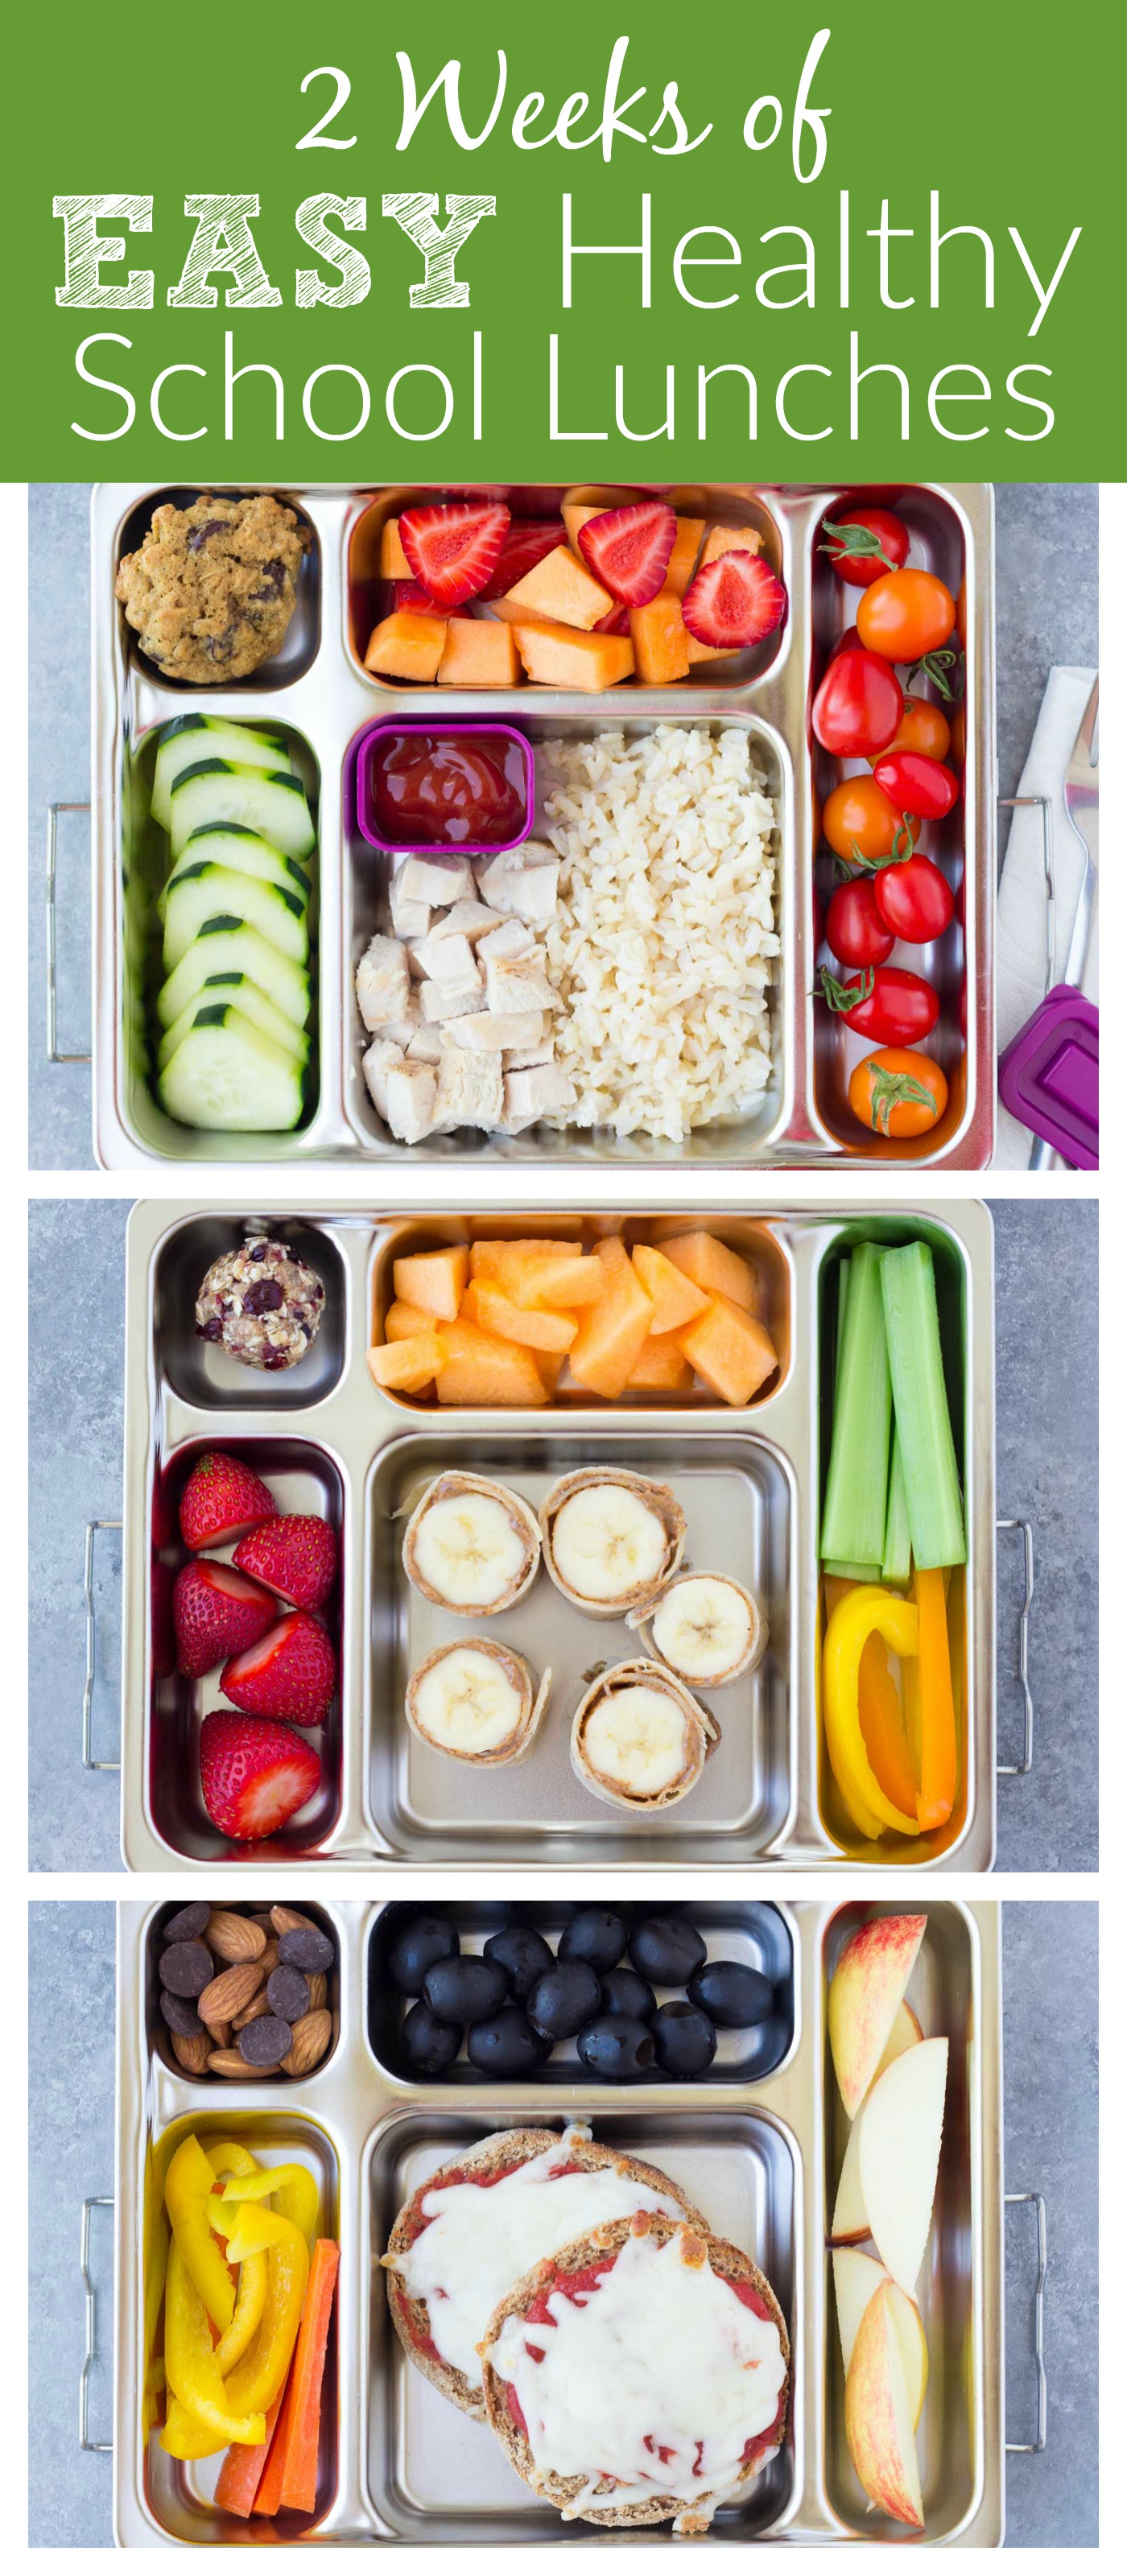 Two weeks of healthy school lunches for kids! These are the lunches that my kids LOVE, and they are easy to make! | www.kristineskitchenblog.com